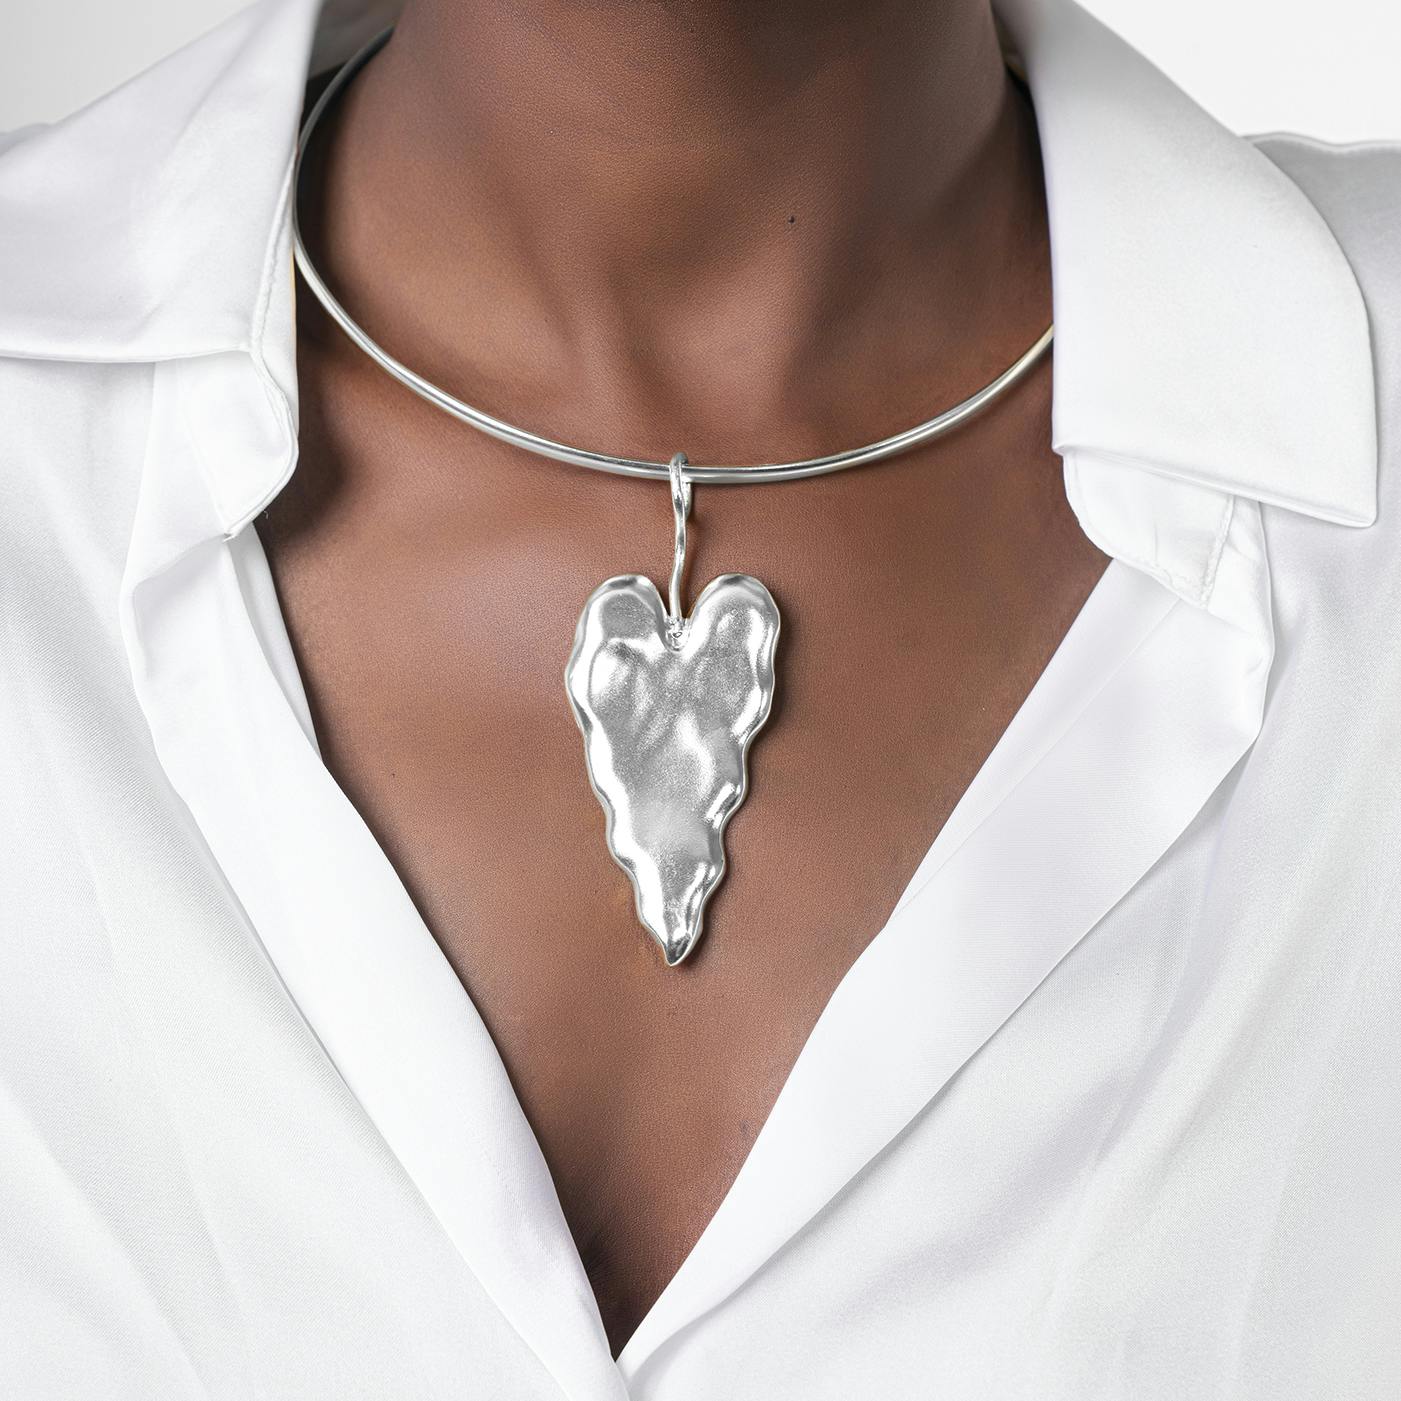 ANTHURIUM NECKLACE SILVER TONE , a product by Equiivalence